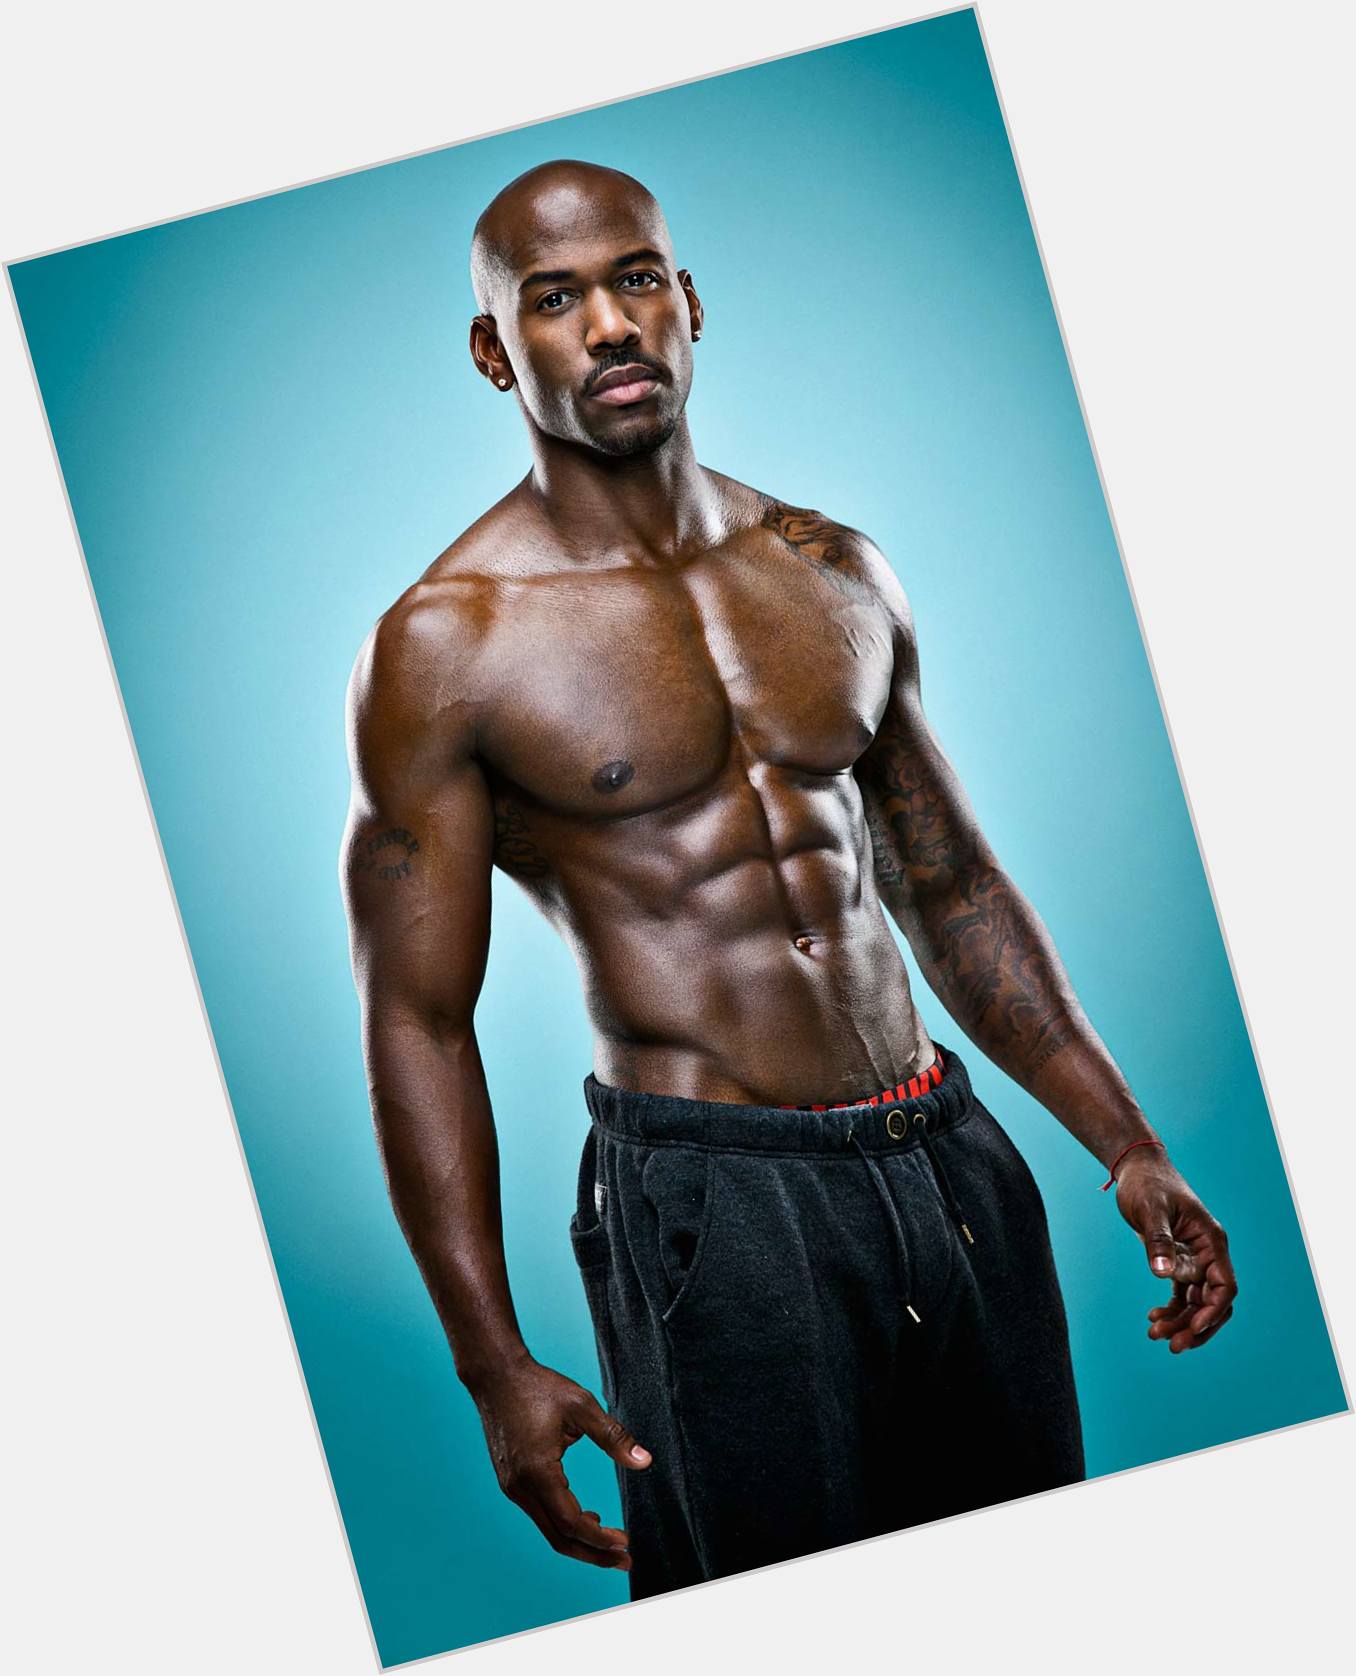 <a href="/hot-men/dolvett-quince/is-he-married-single-dating-kim-christian-relationship">Dolvett Quince</a>  